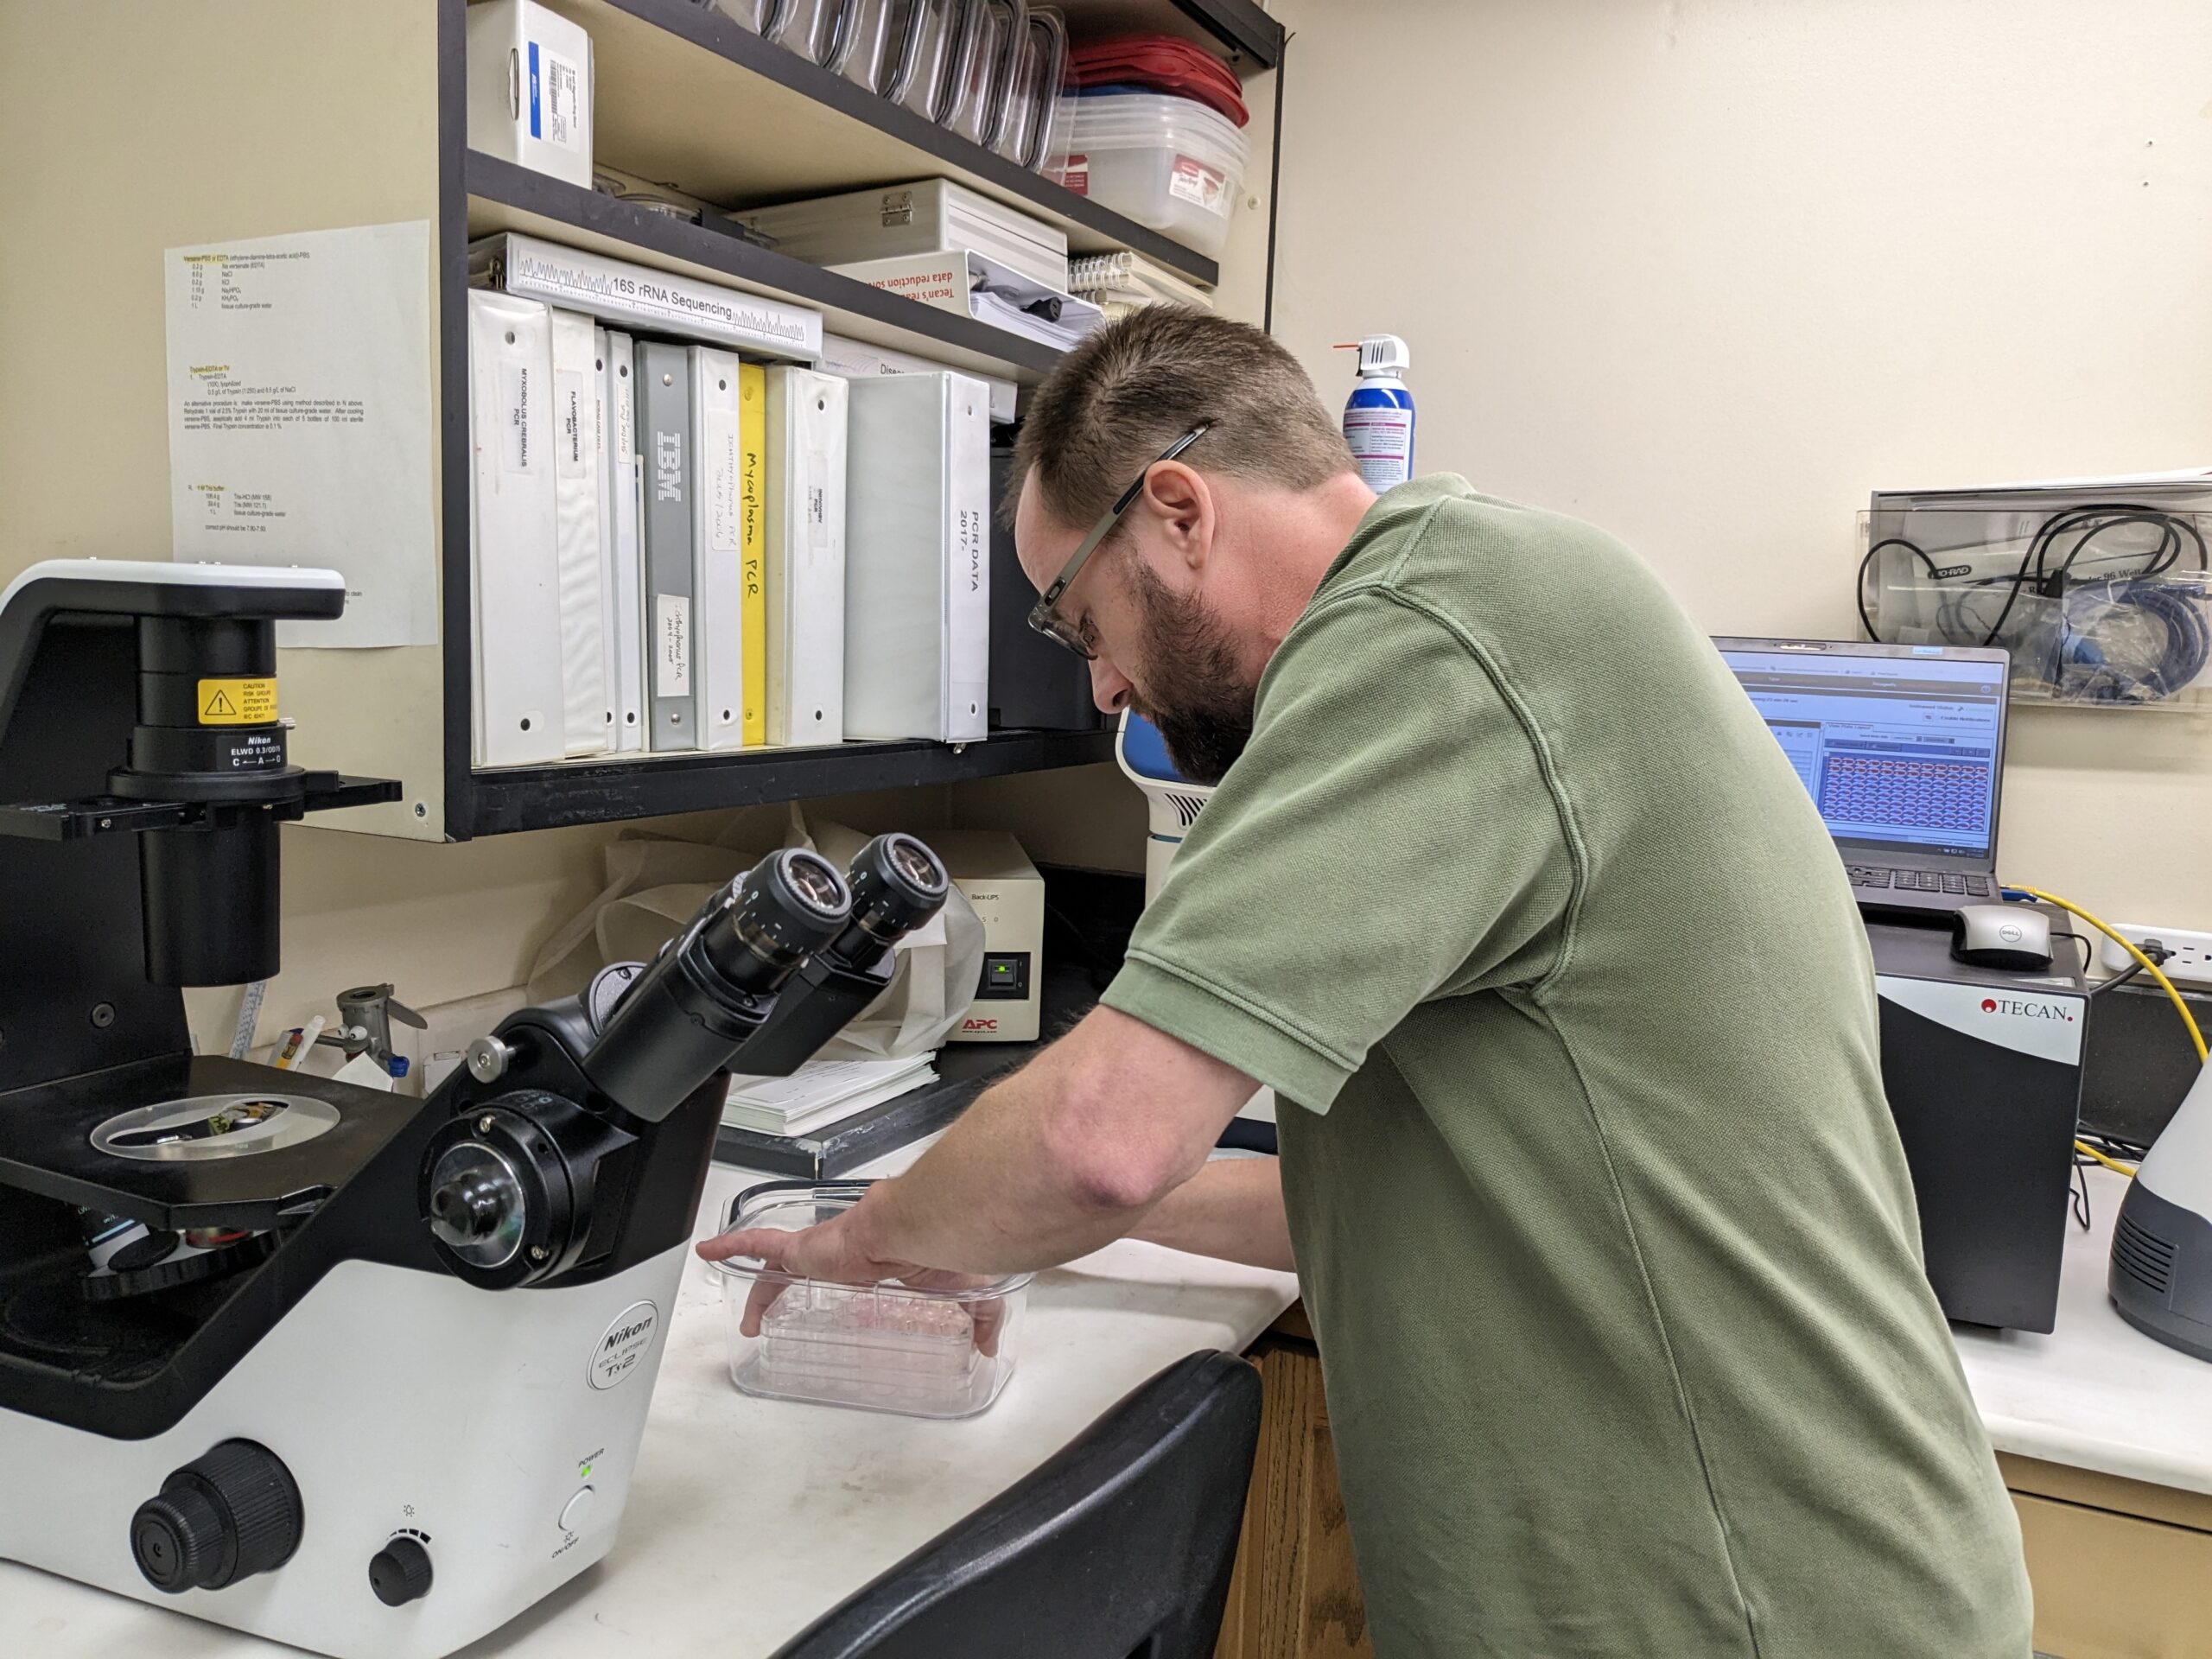 A man moves a plastic tray of cell samples to a microscope in a laboratory.